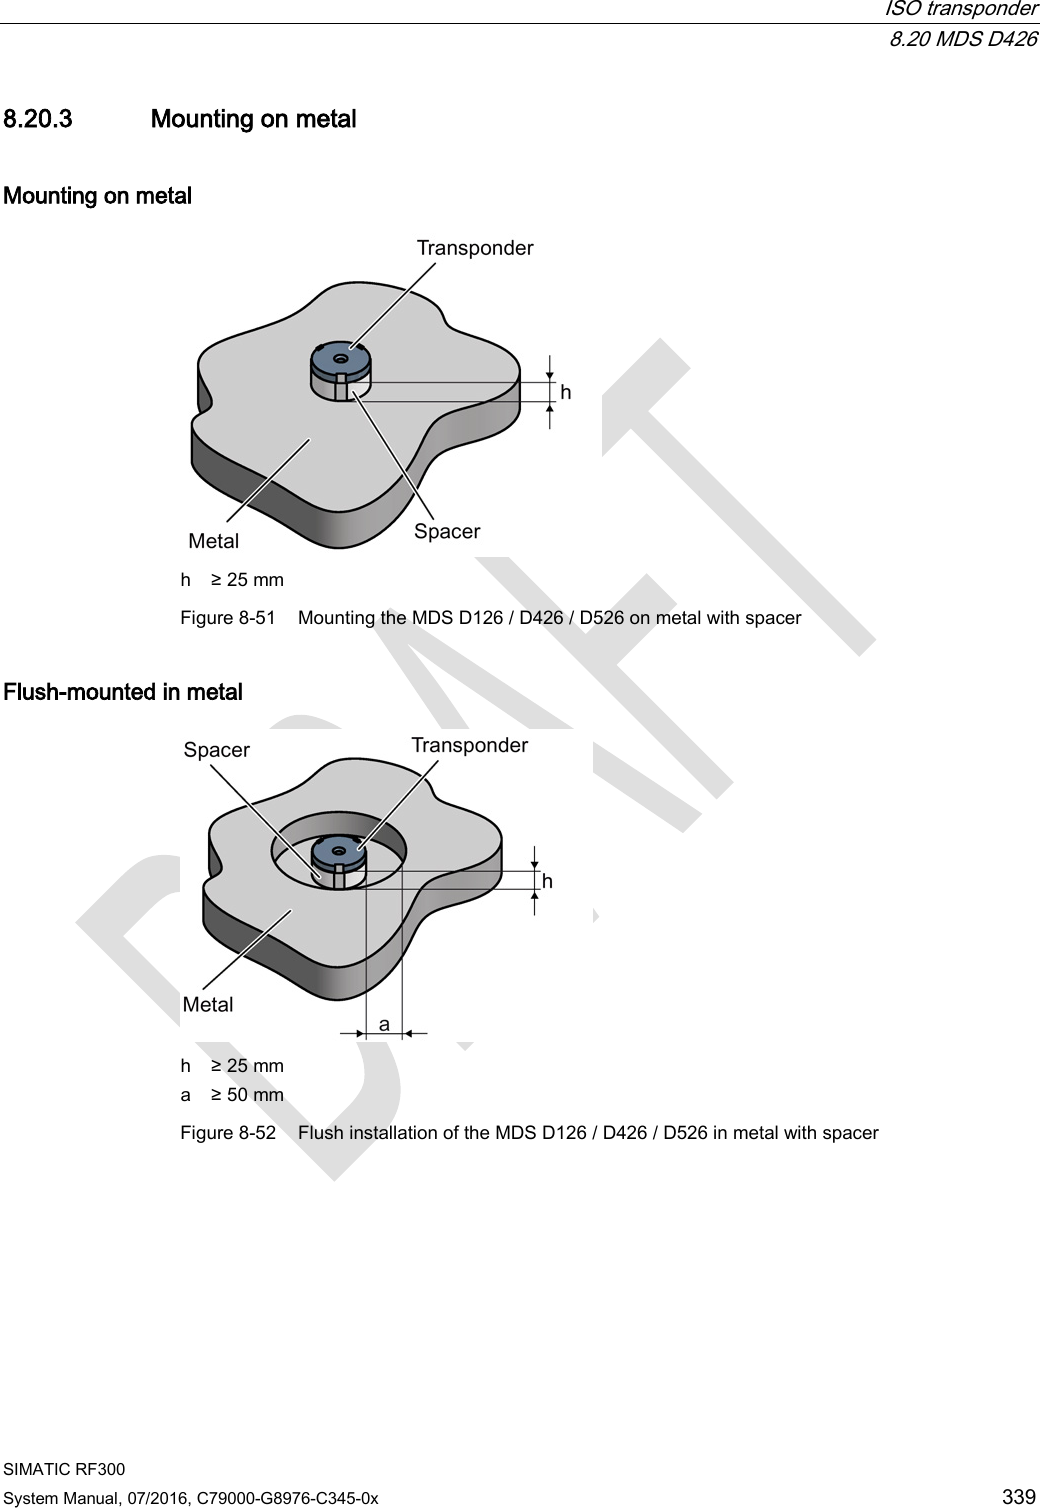  ISO transponder  8.20 MDS D426 SIMATIC RF300 System Manual, 07/2016, C79000-G8976-C345-0x 339 8.20.3 Mounting on metal Mounting on metal  h ≥ 25 mm Figure 8-51 Mounting the MDS D126 / D426 / D526 on metal with spacer Flush-mounted in metal  h ≥ 25 mm a ≥ 50 mm Figure 8-52 Flush installation of the MDS D126 / D426 / D526 in metal with spacer 